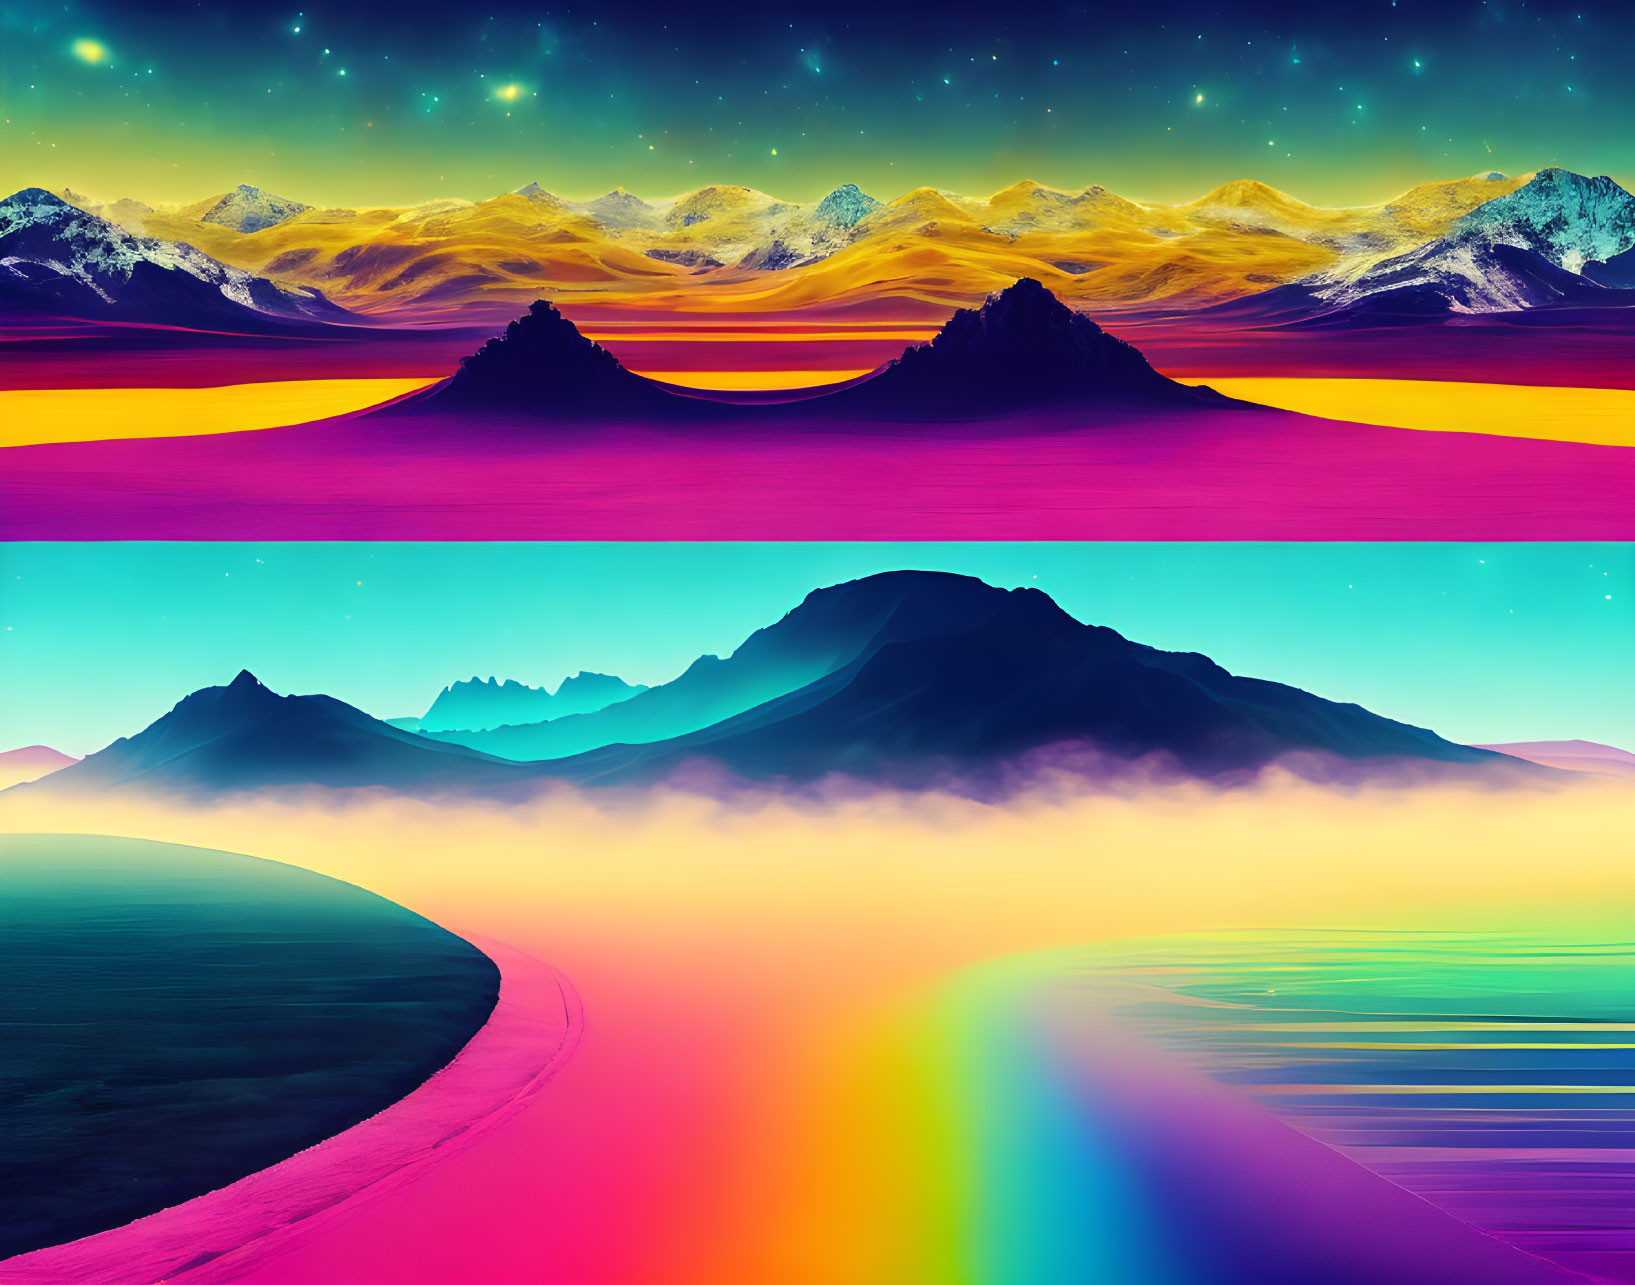 Colorful surreal landscape with rainbow, mountains, and starry sky